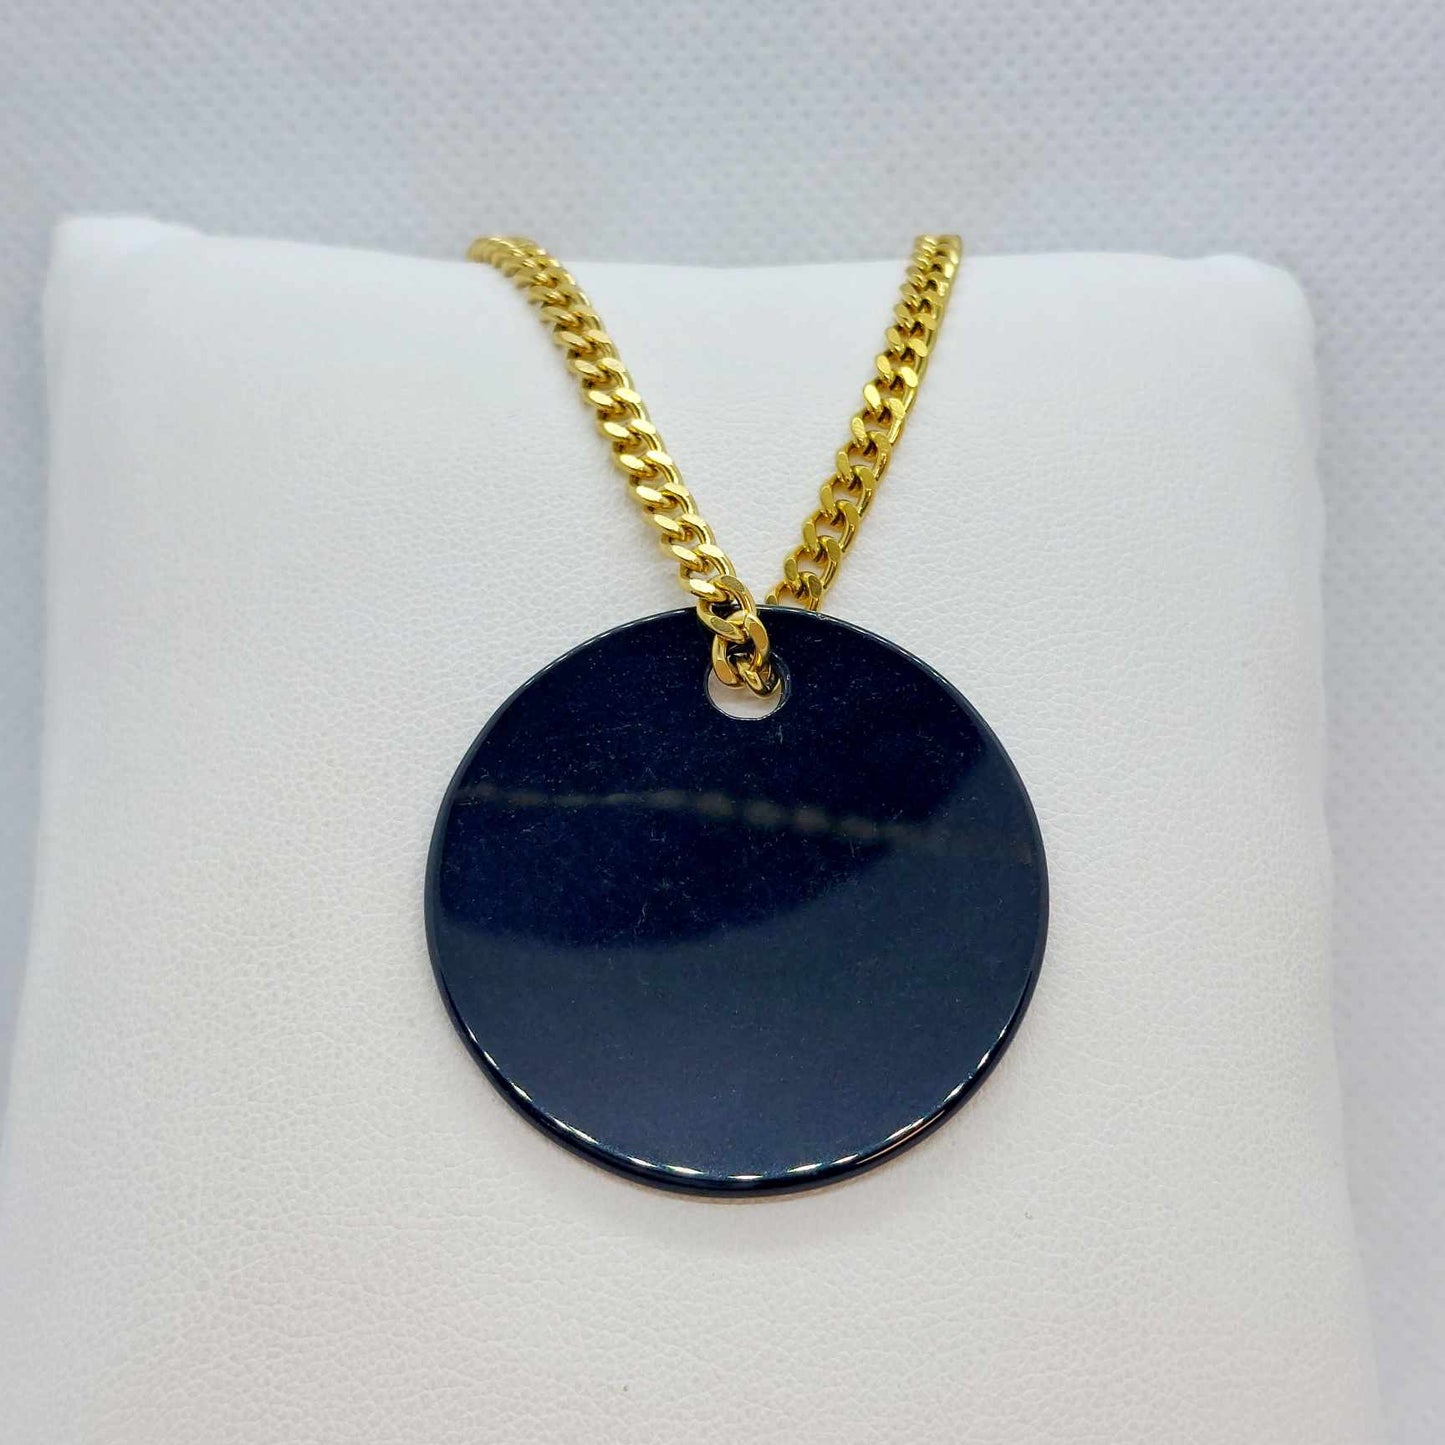 Natural Onyx Slab Pendant with Gold Plated Stainless Steel Chain Necklace